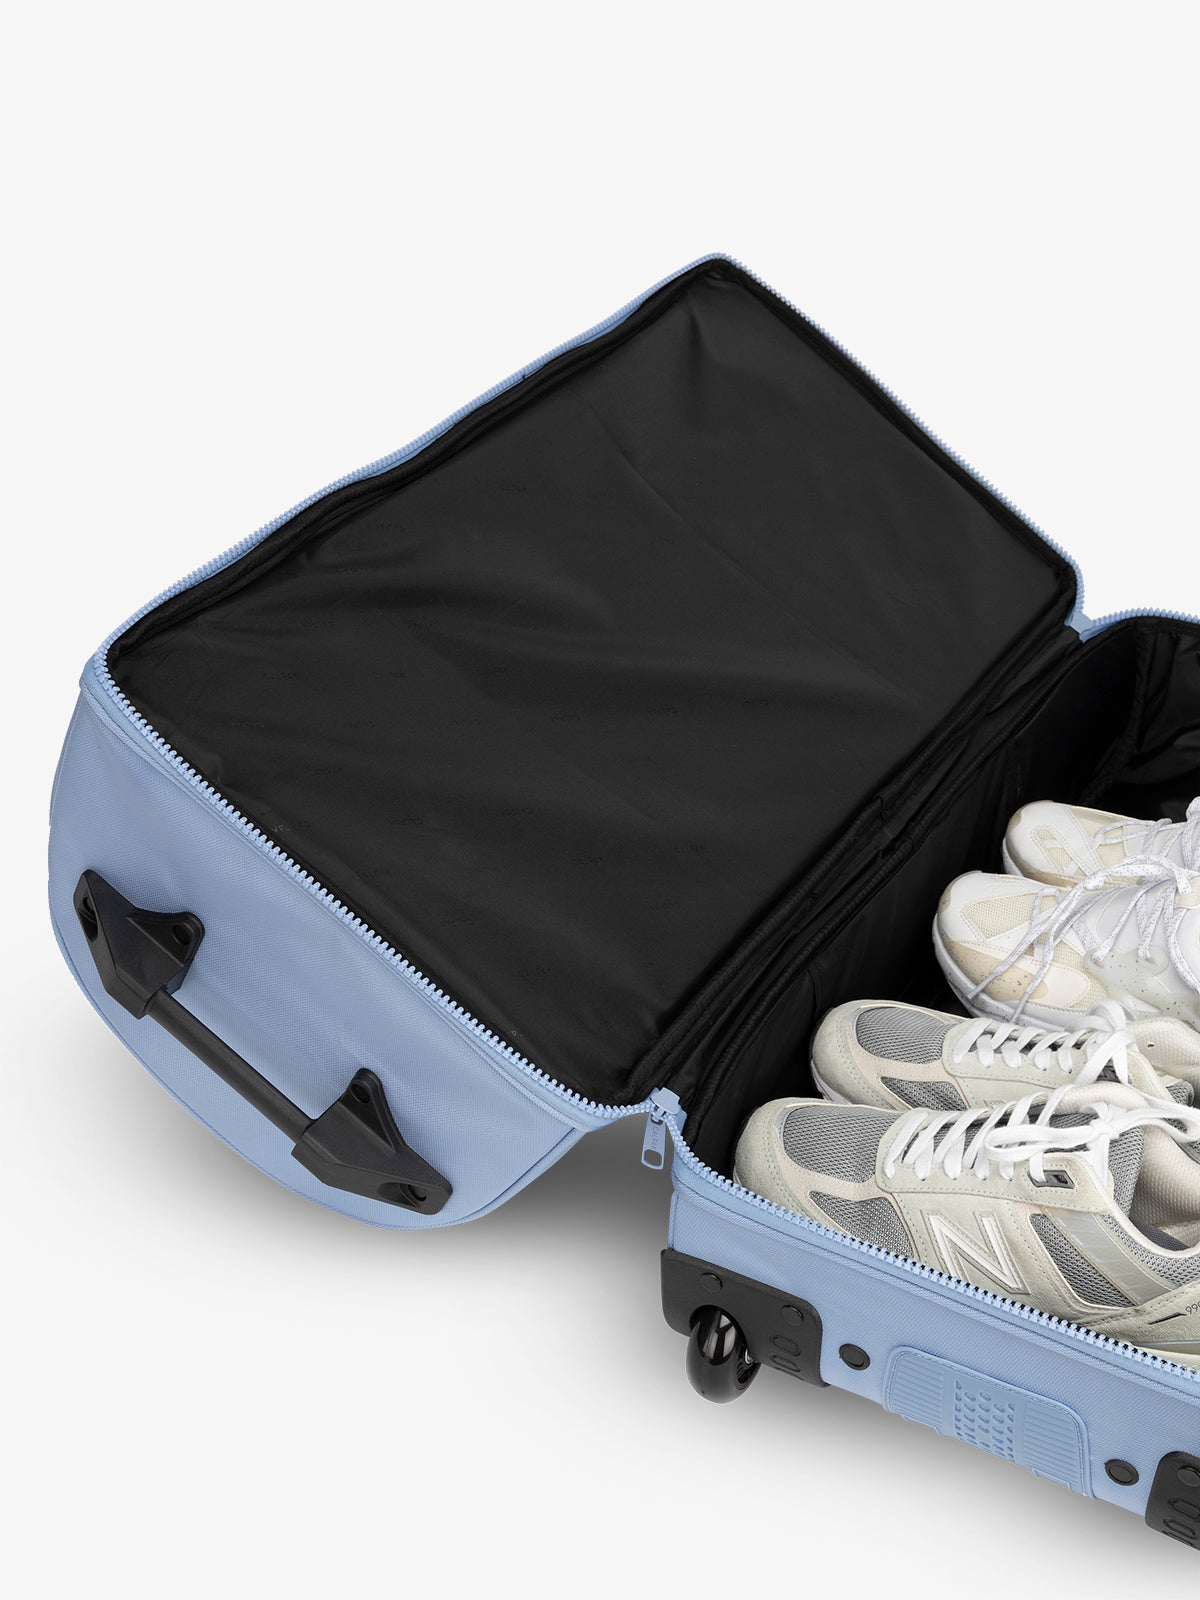 Shoe compartment interior of large rolling travel duffel bag in light blue